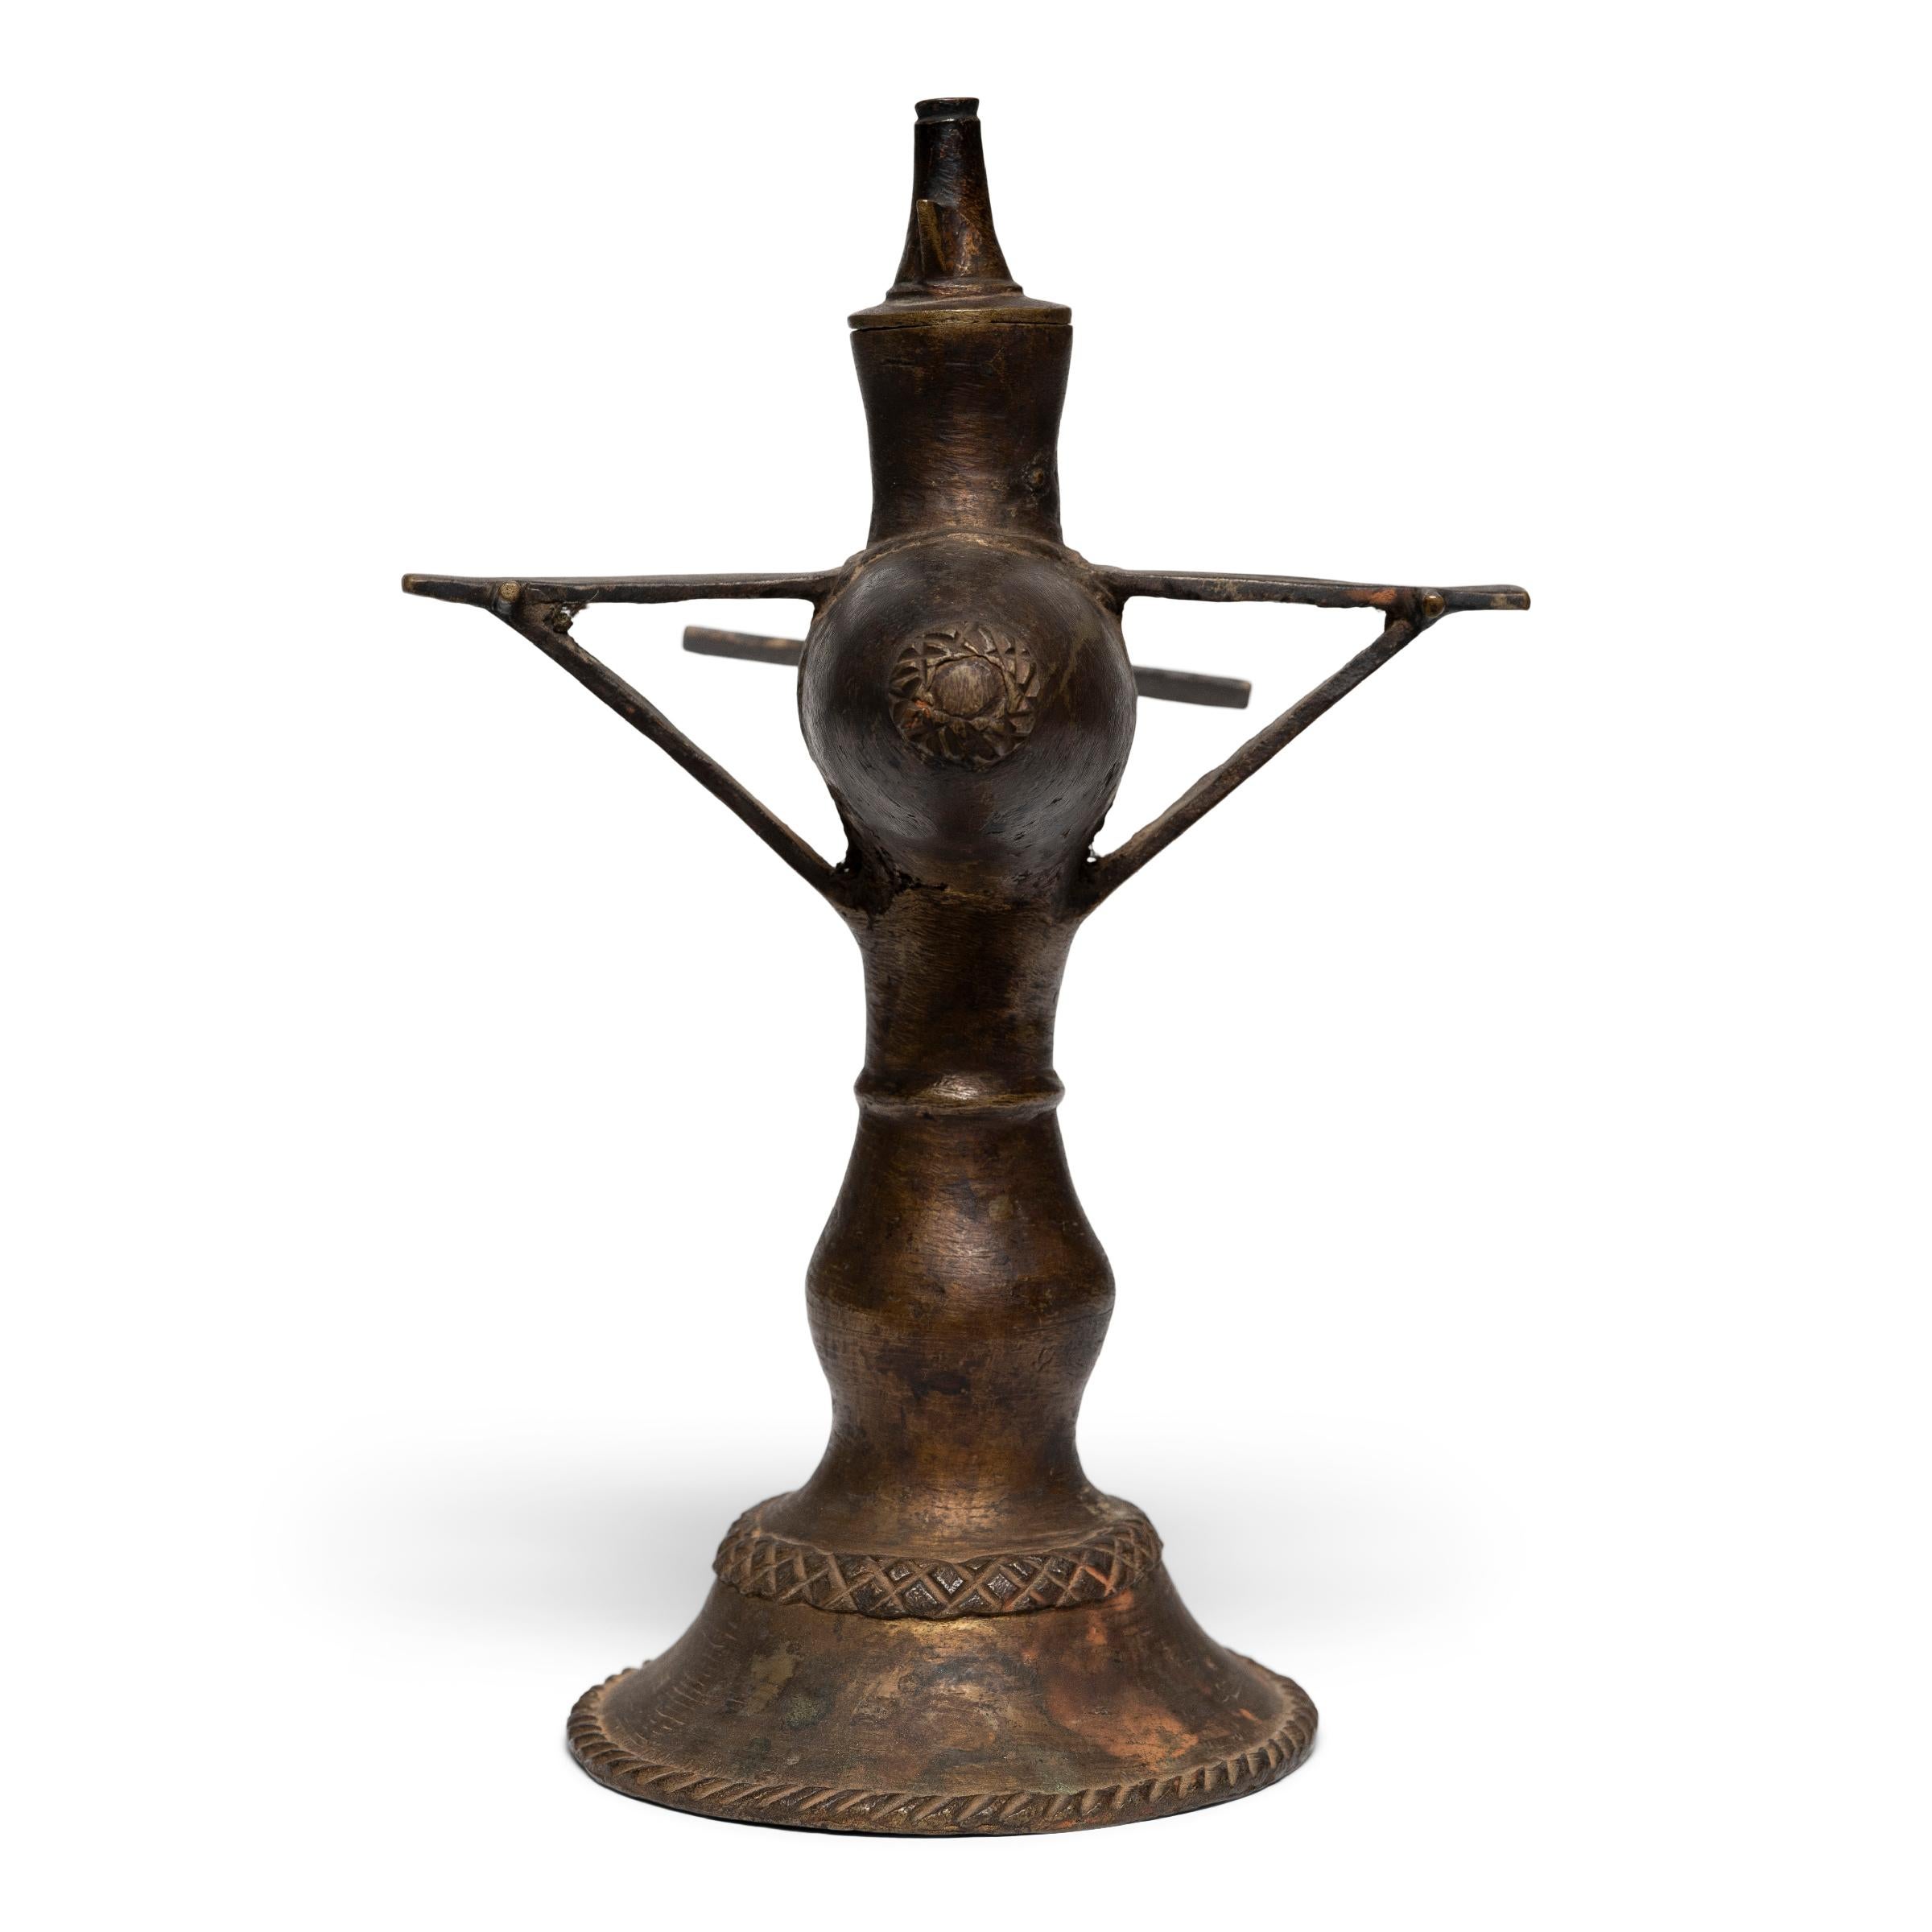 This 20th century South Asian oil lamp is made of brass in the shape of an aircraft. Oil lamps like these were likely handcrafted using the century old lost-wax process of metal casting where skilled artisans would pour molten metal into a mold that